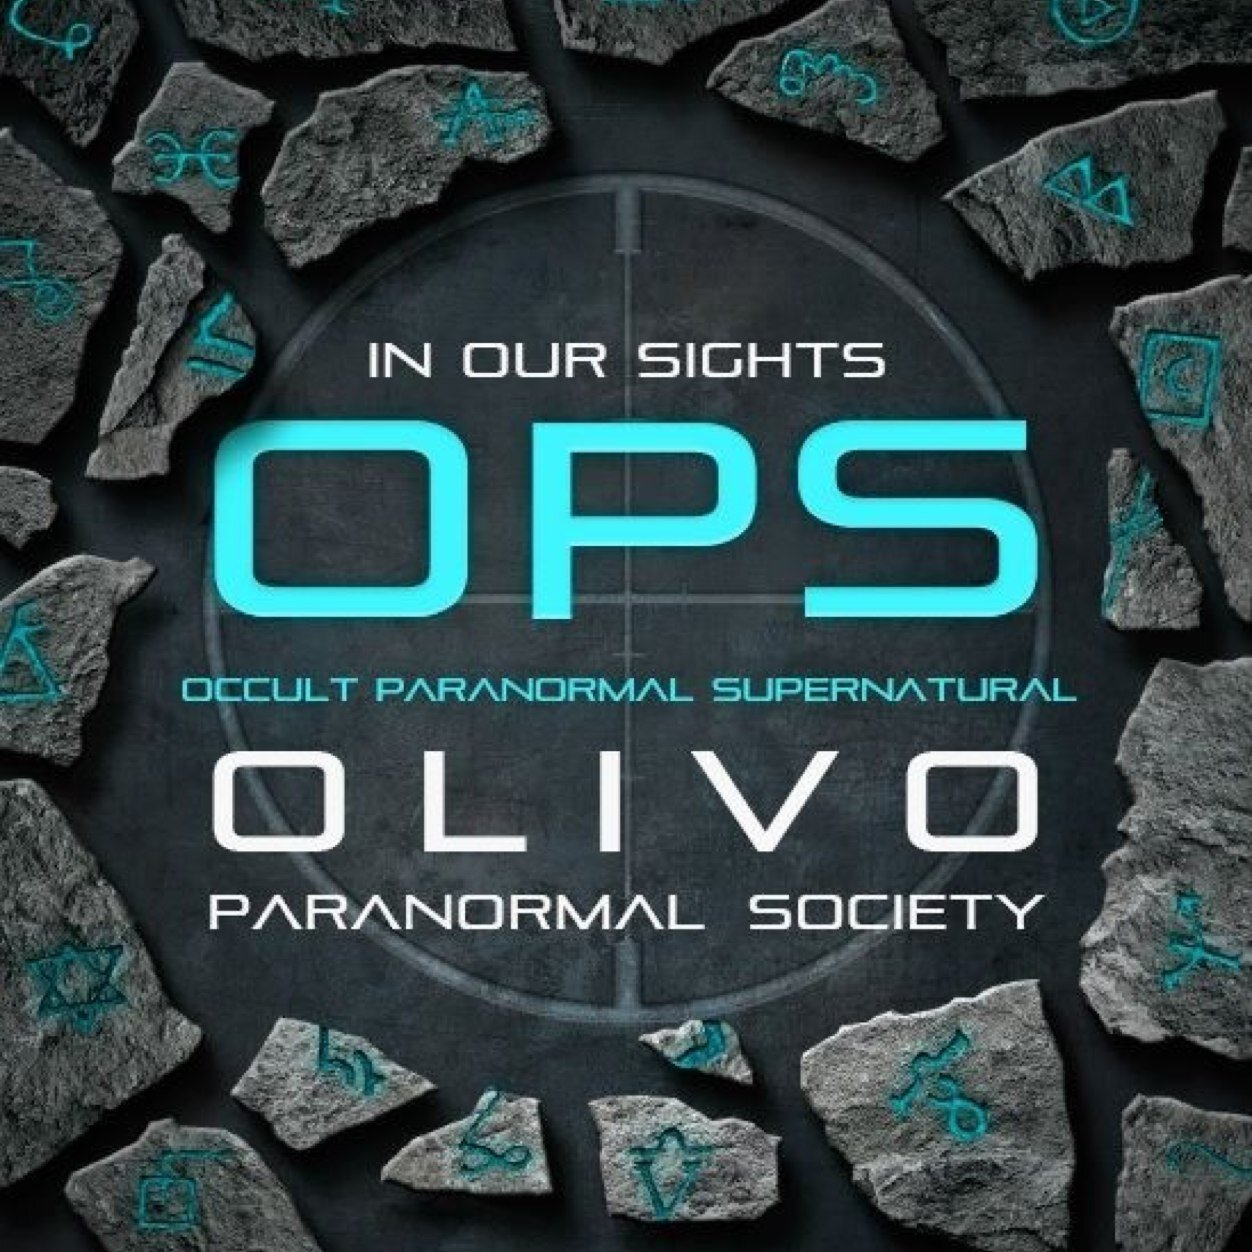 Olivo Paranormal Society (O.P.S.)             
Check us out on YouTube & Facebook!!!!! 
http://t.co/VhiRsTagFy